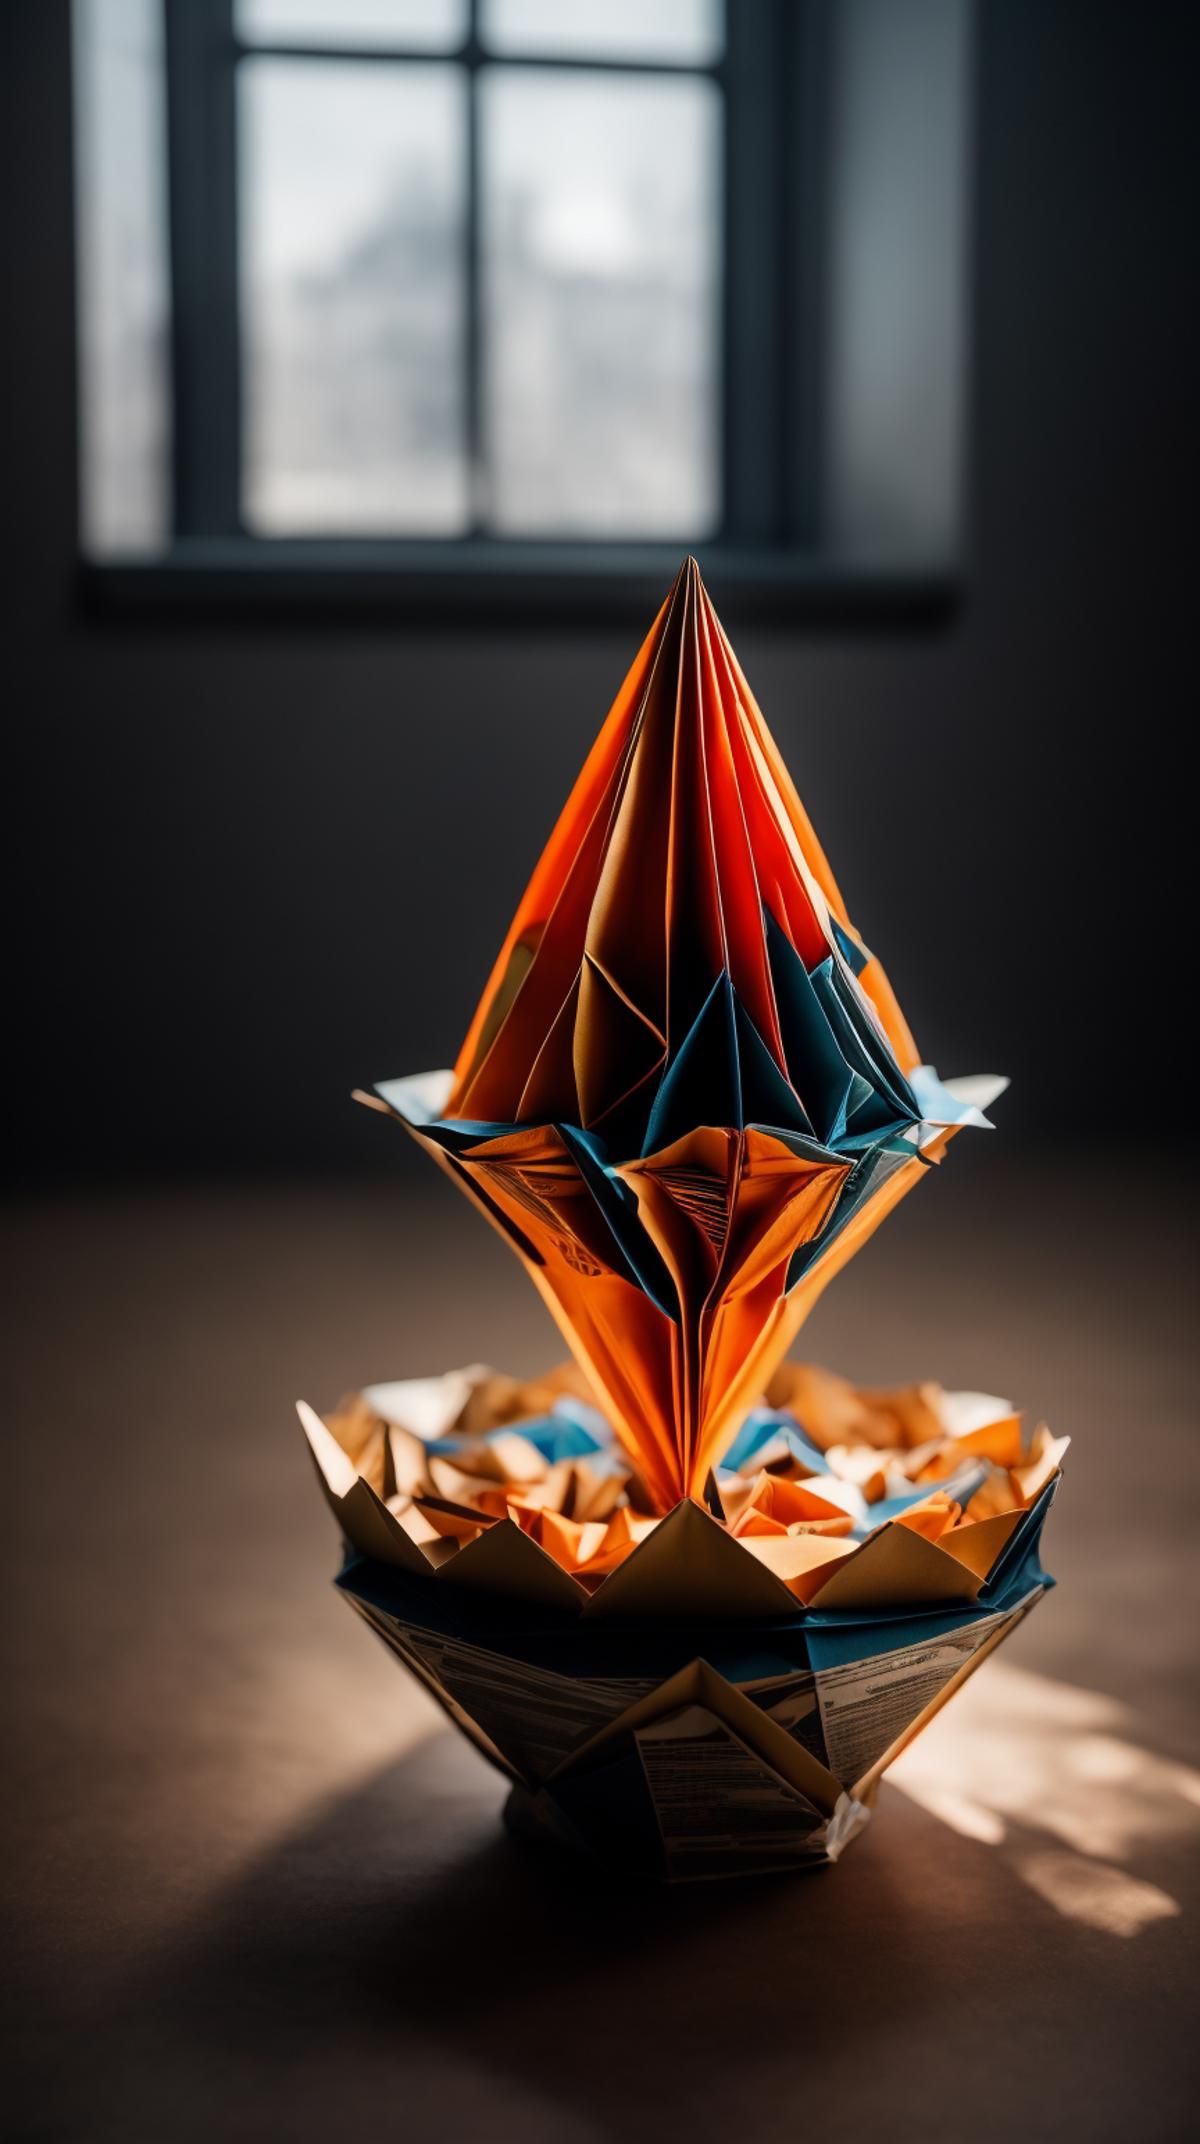 Origami World image by mnemic